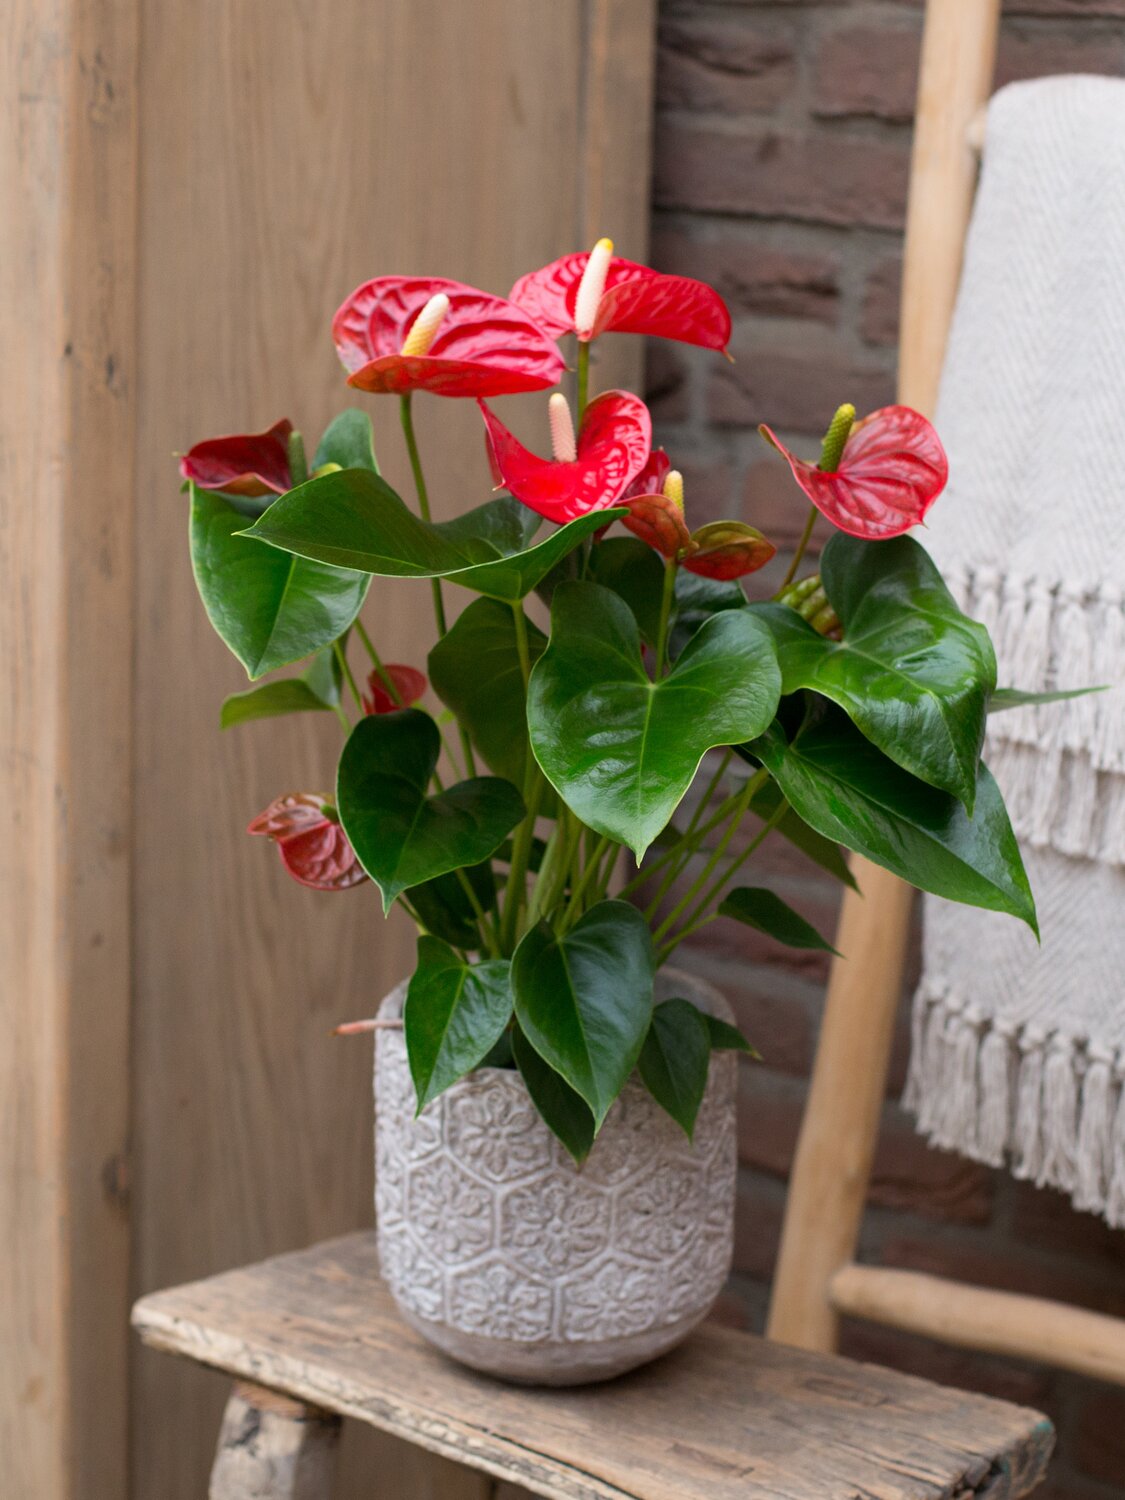 An anthurium plant with pink, glossy flowers in a white planter